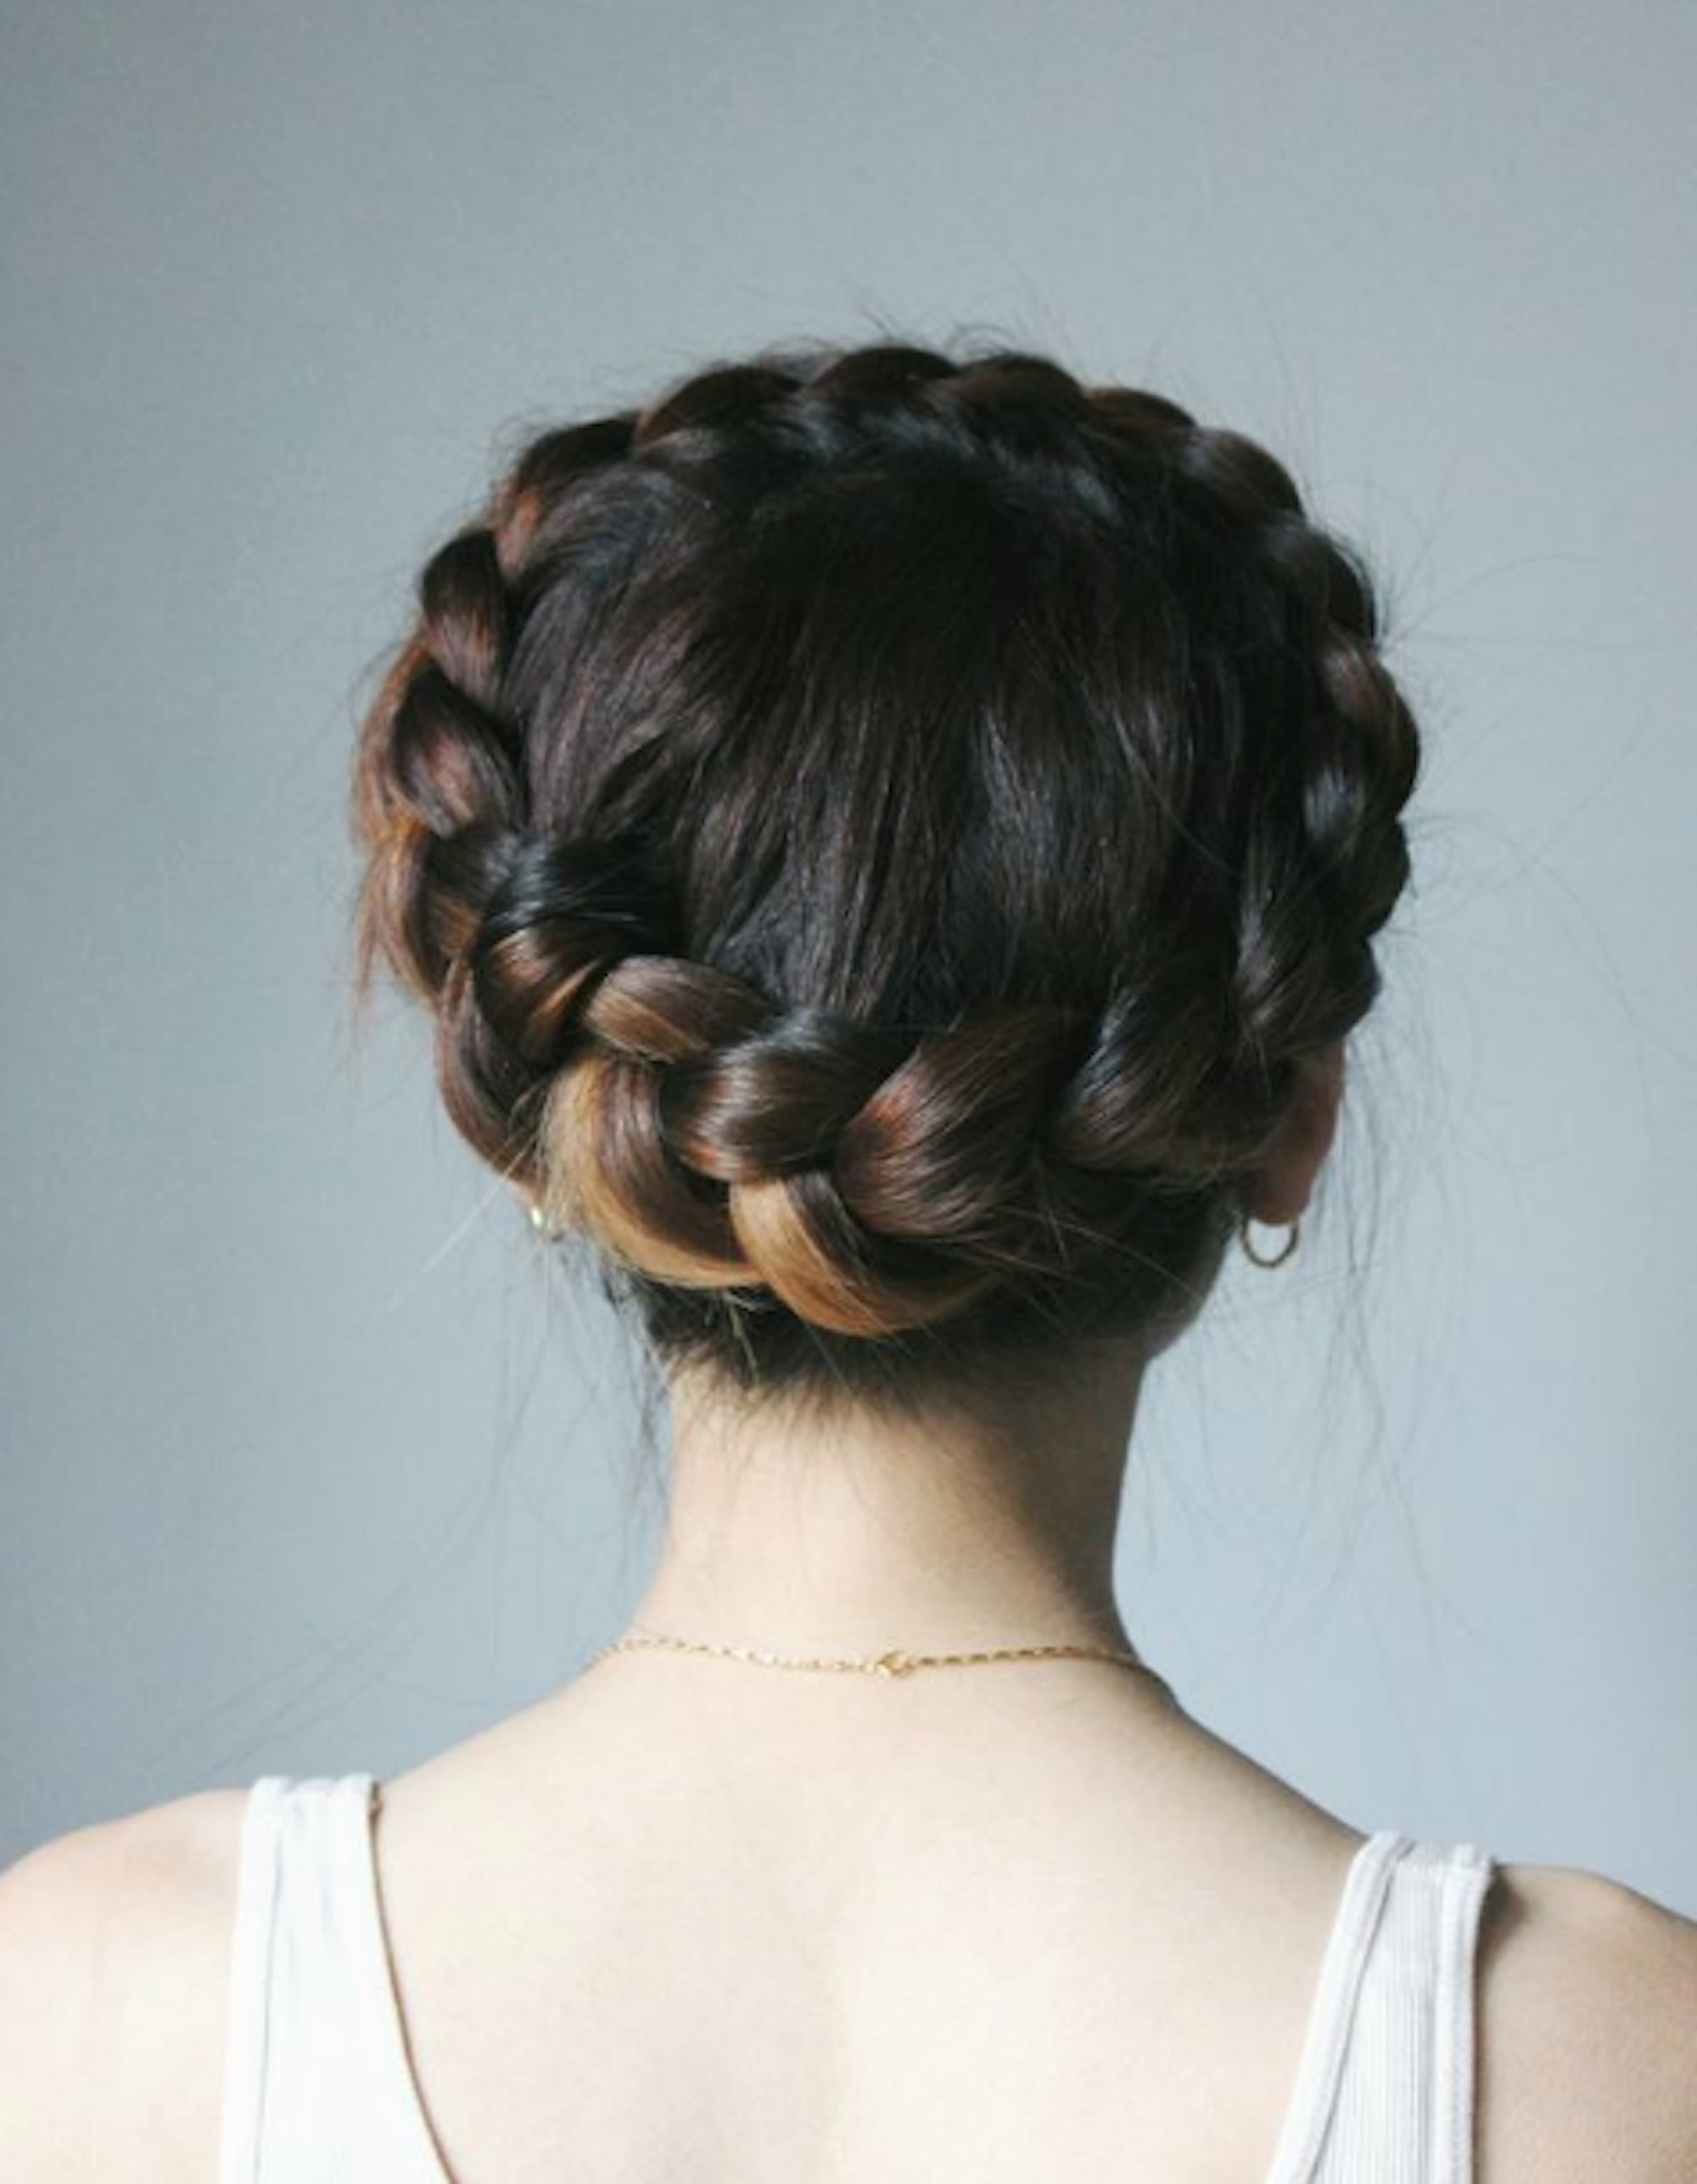 26 Best Braided Hairstyles - Best Crown, Side, and French Braid Ideas